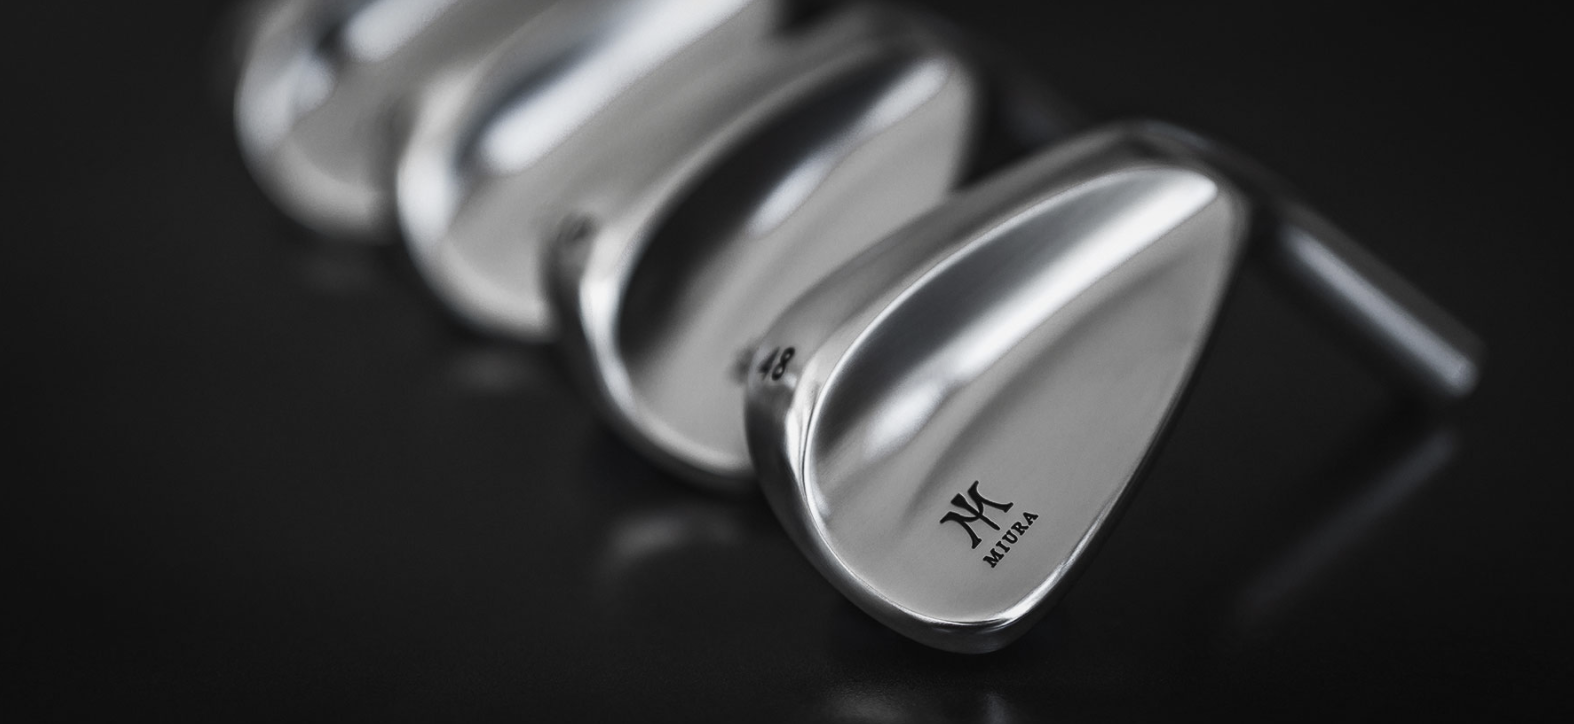 Milled Tour Wedge Image